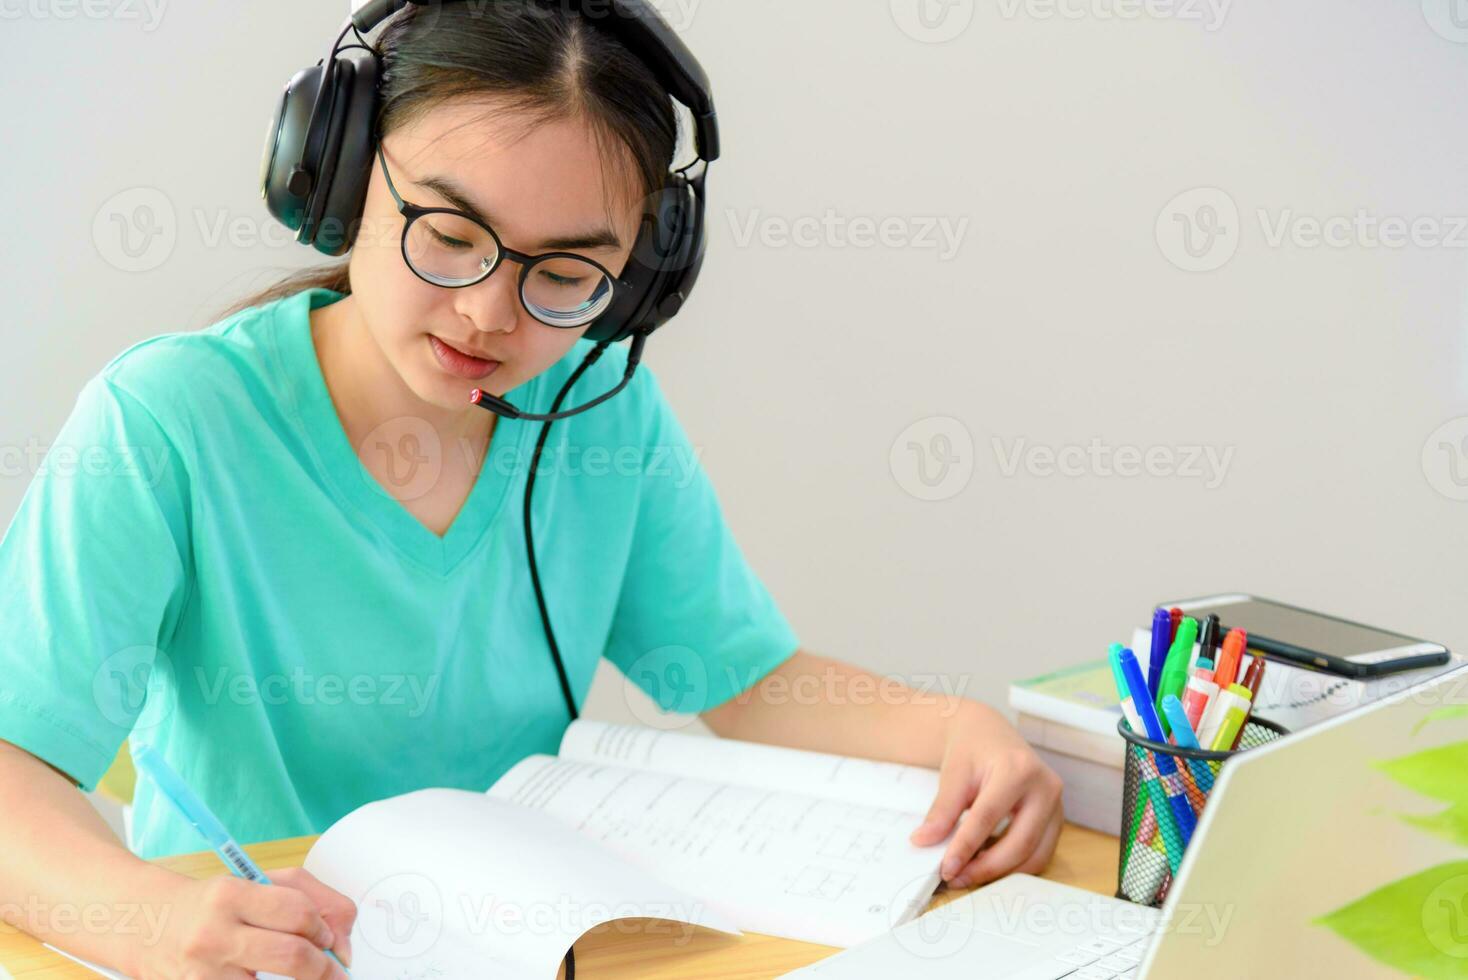 Asian woman writing notes at book learning online photo